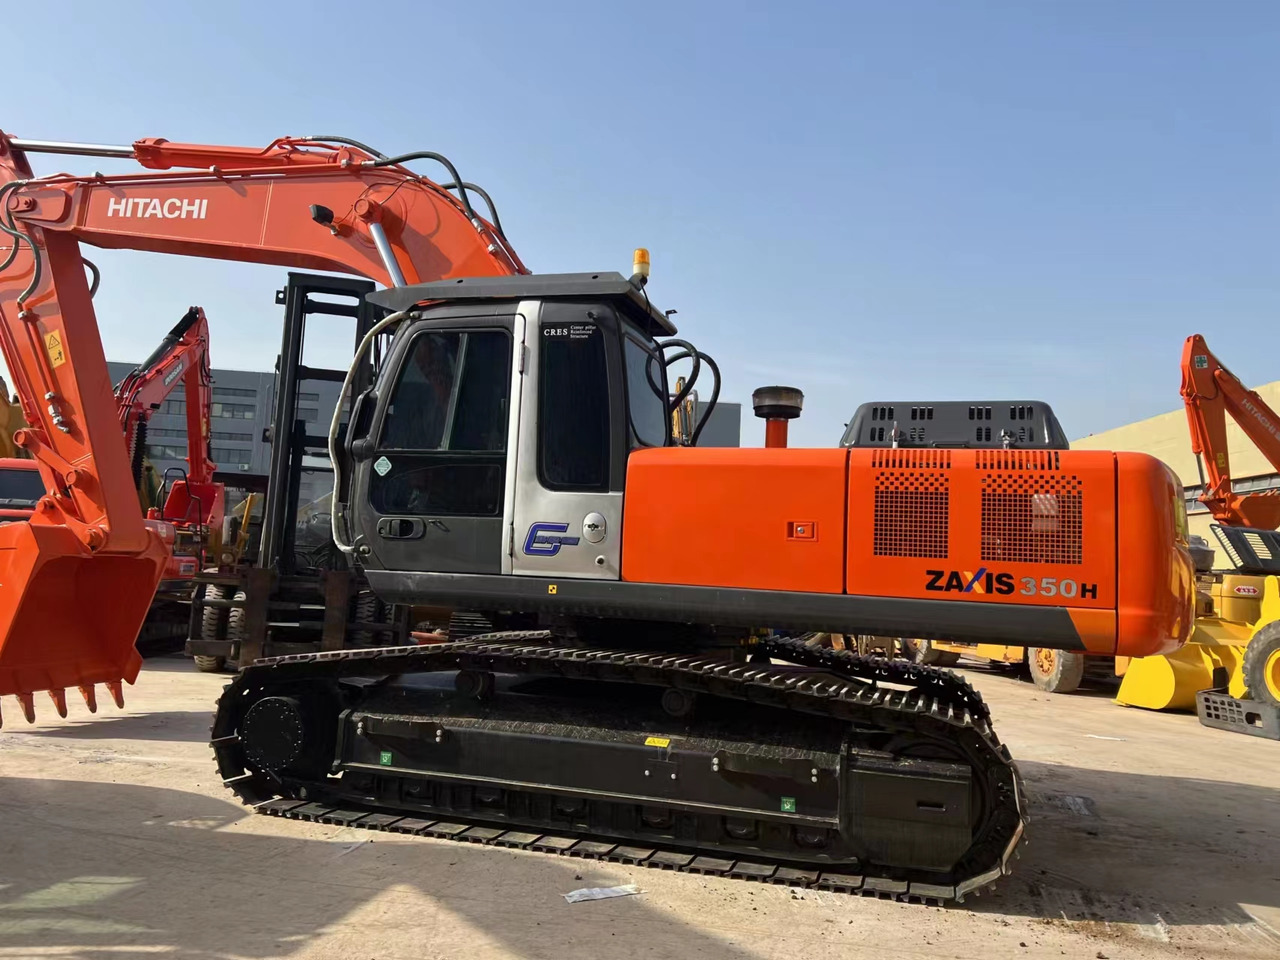 Bæltegravemaskine High quality HITACHI used excavator ZX350H good condition in stock: billede 32